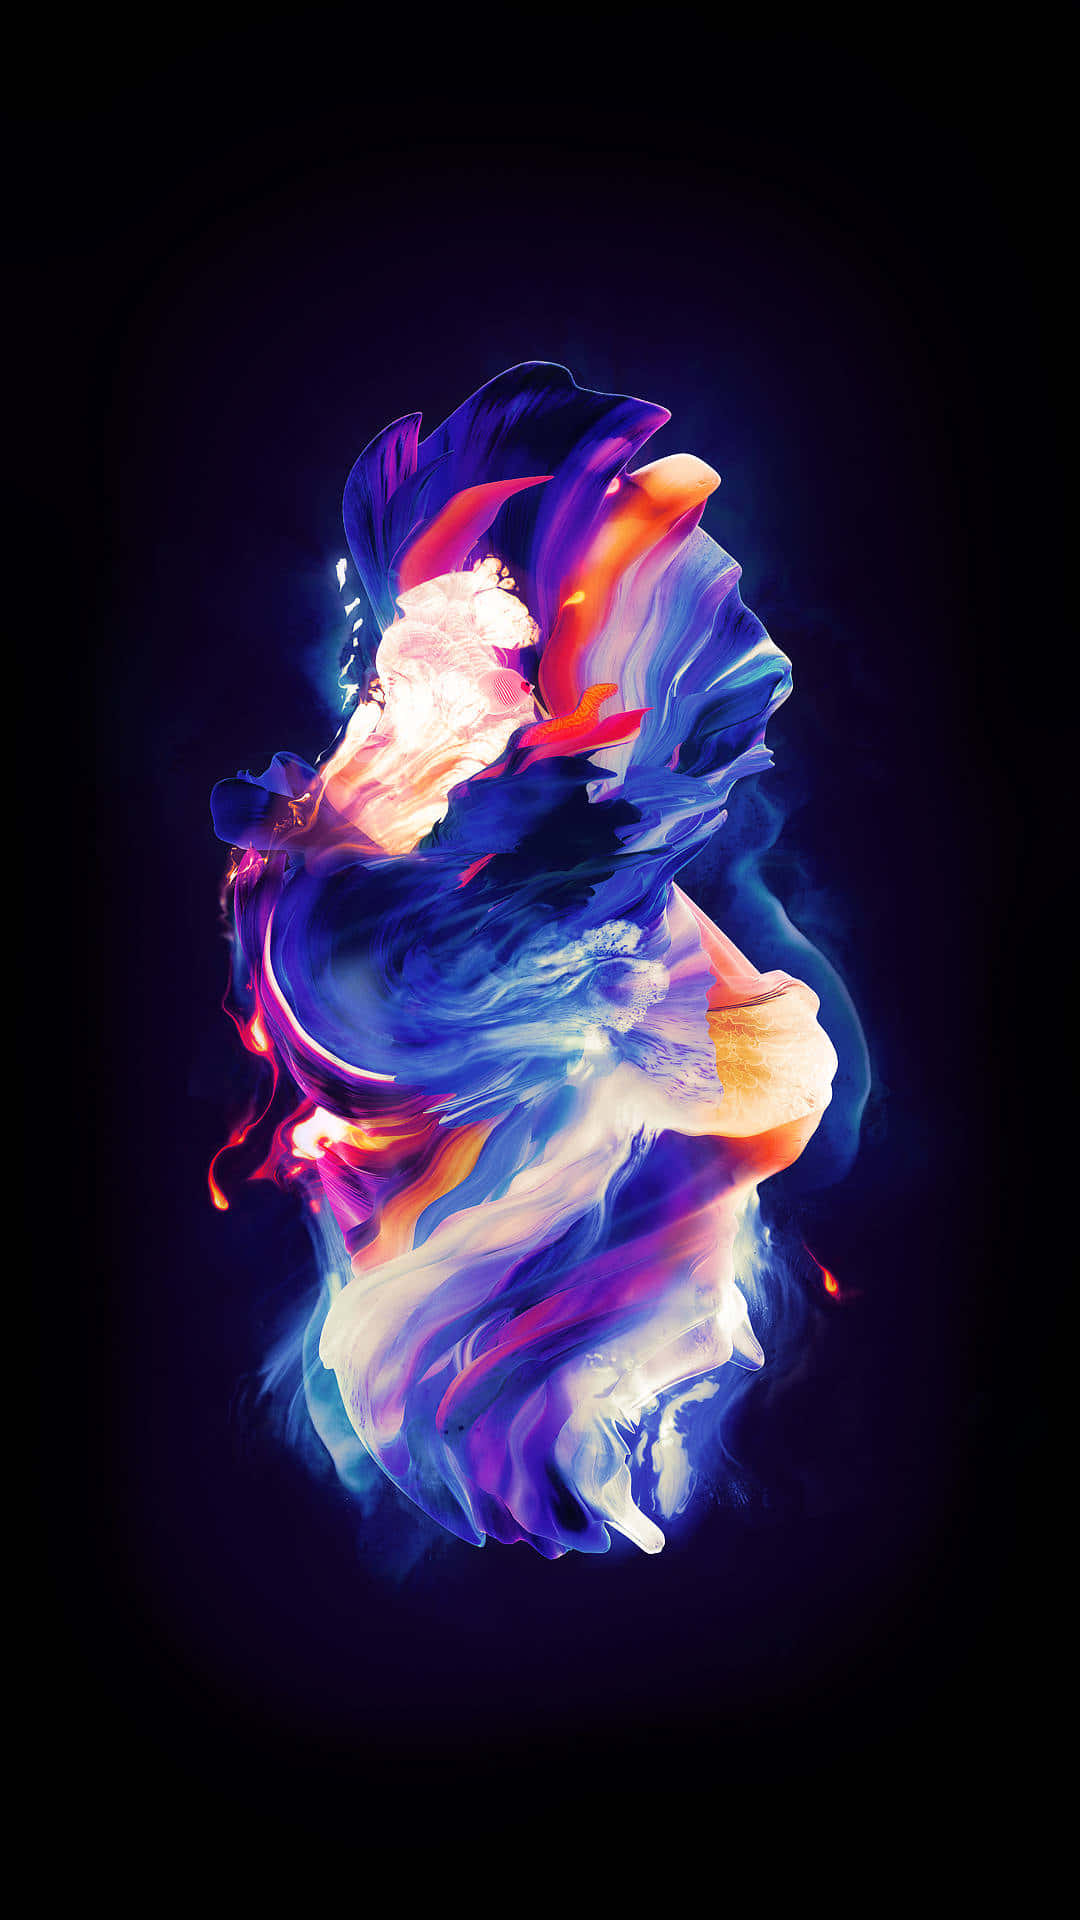 Colorful Painted Art Pixel 3 Oled Background